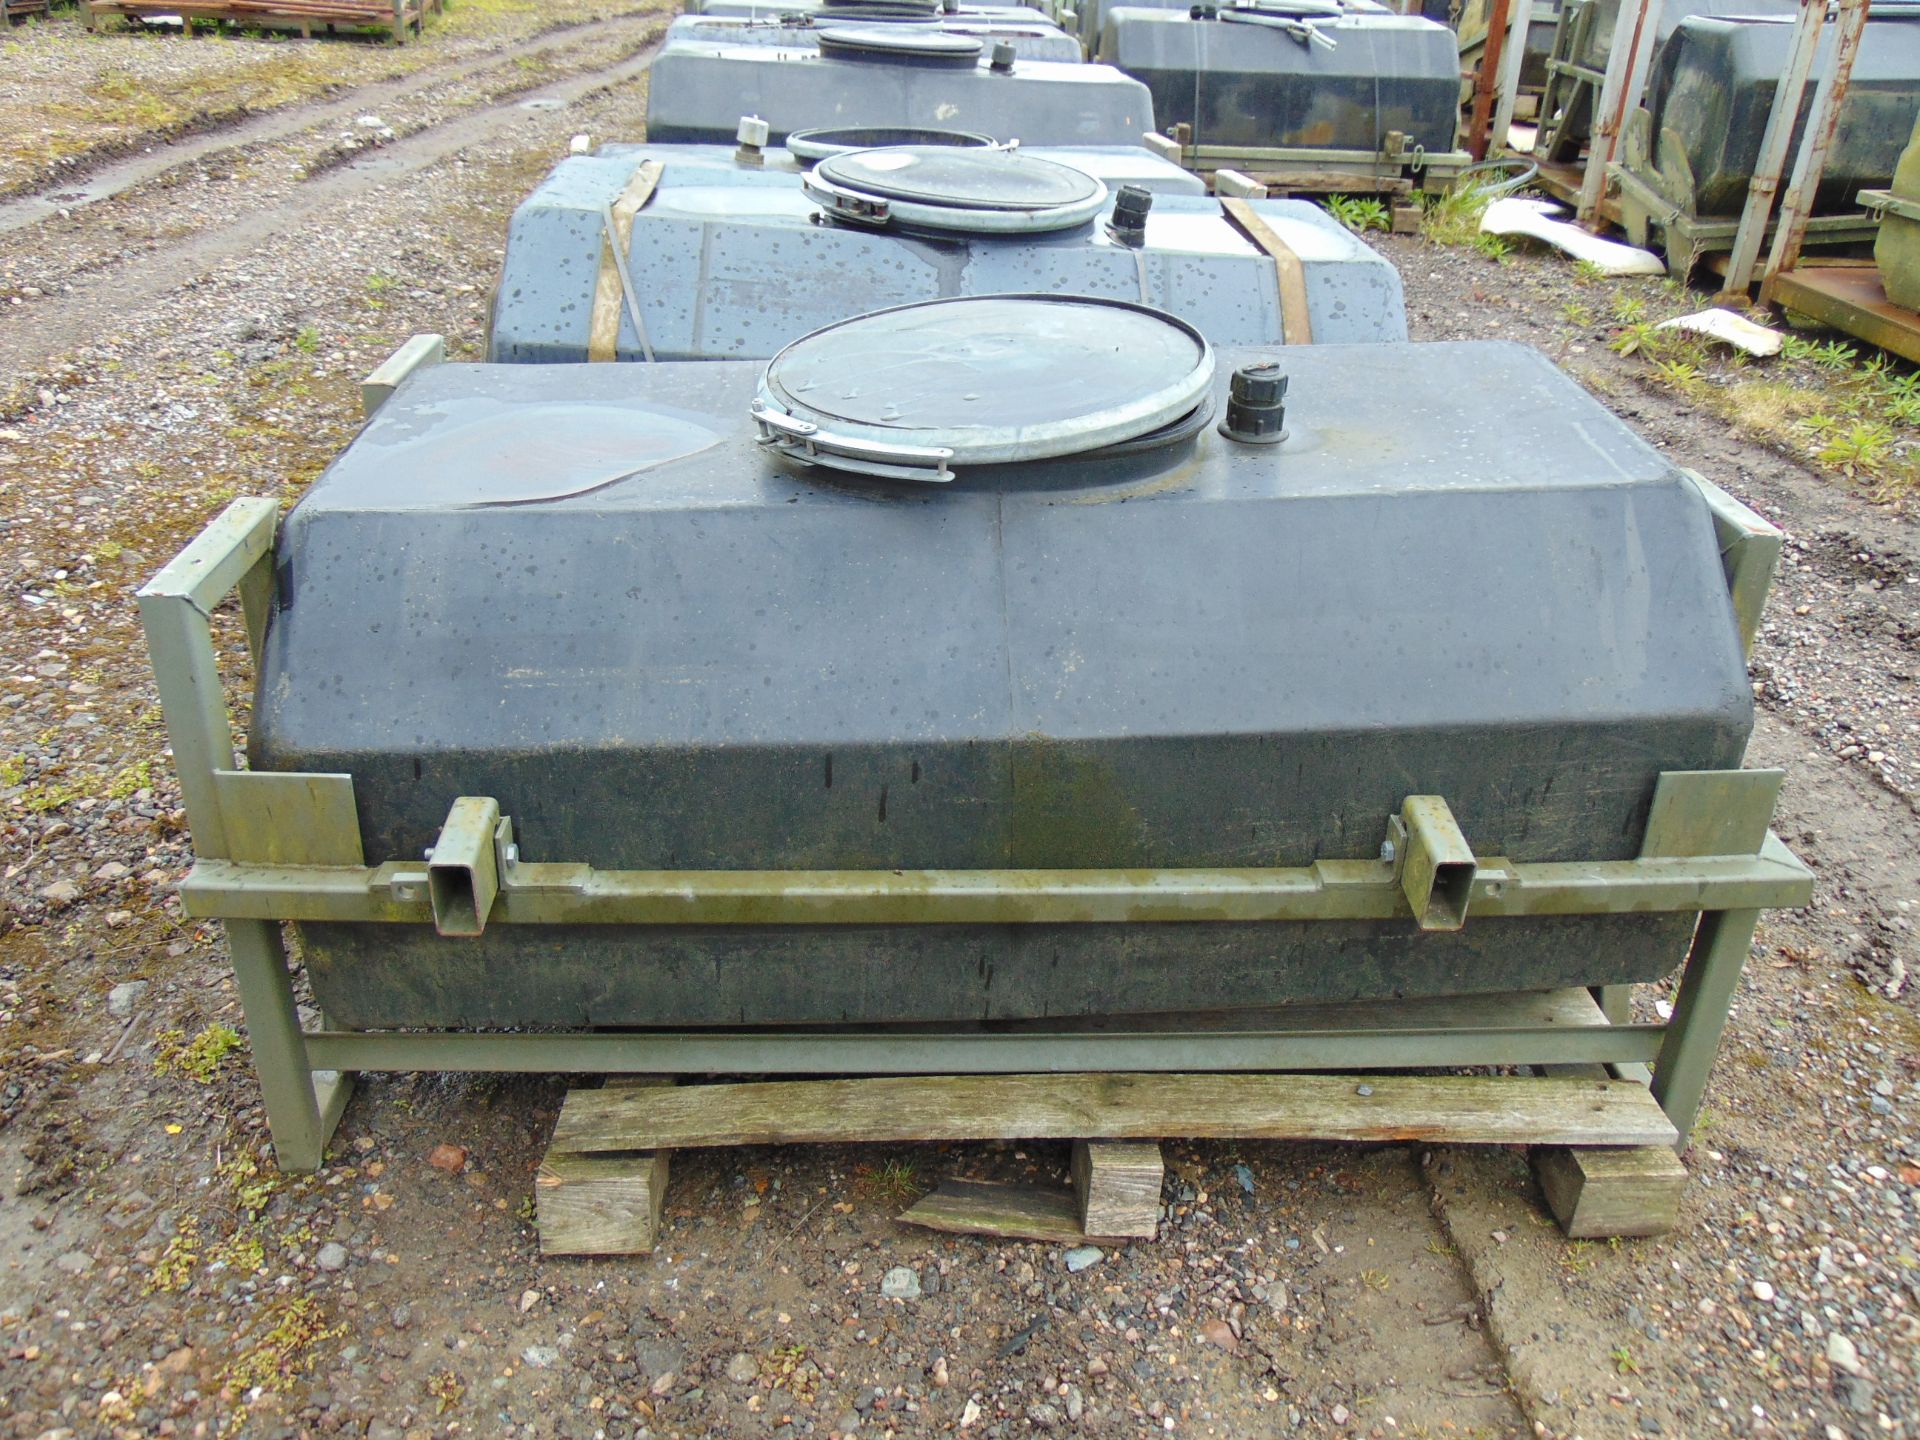 1 x Demountable 100 Gall Water Bowser c/w Frame for Fitting to Land Rover Trailer - Image 3 of 3